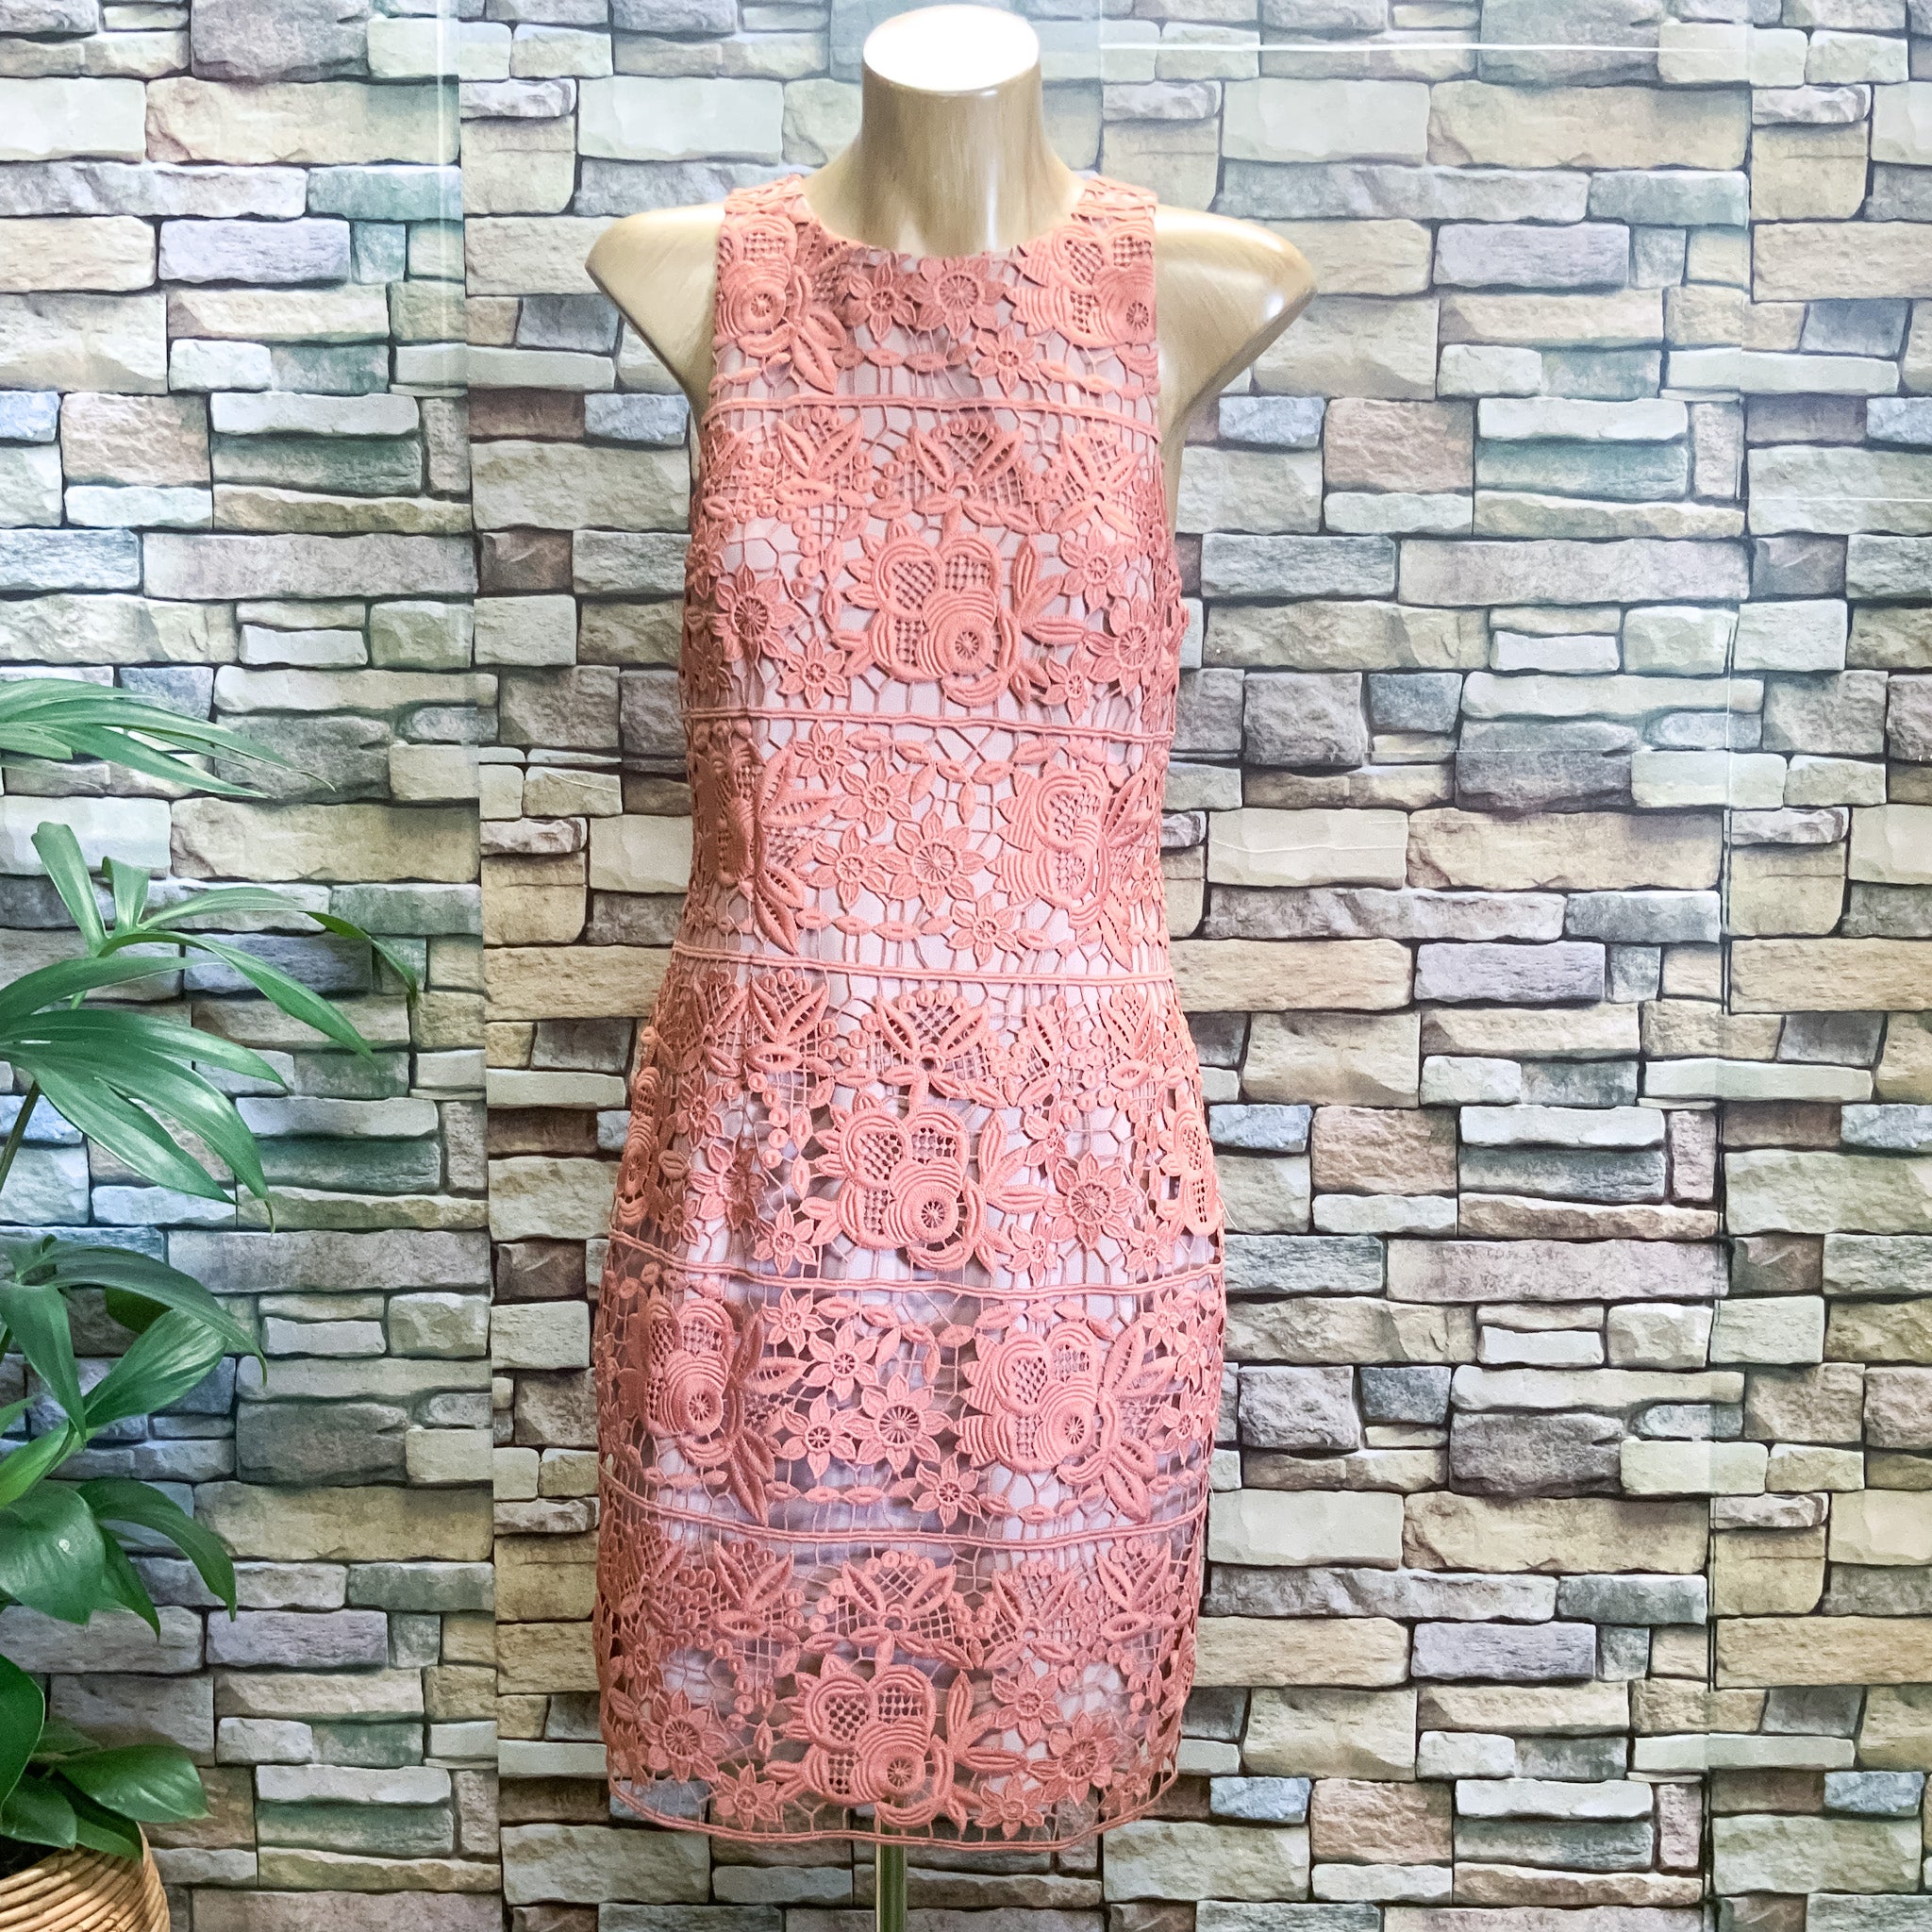 MINISTRY OF STYLE Peach Lace Form Fitting Cocktail Dress - Size 8